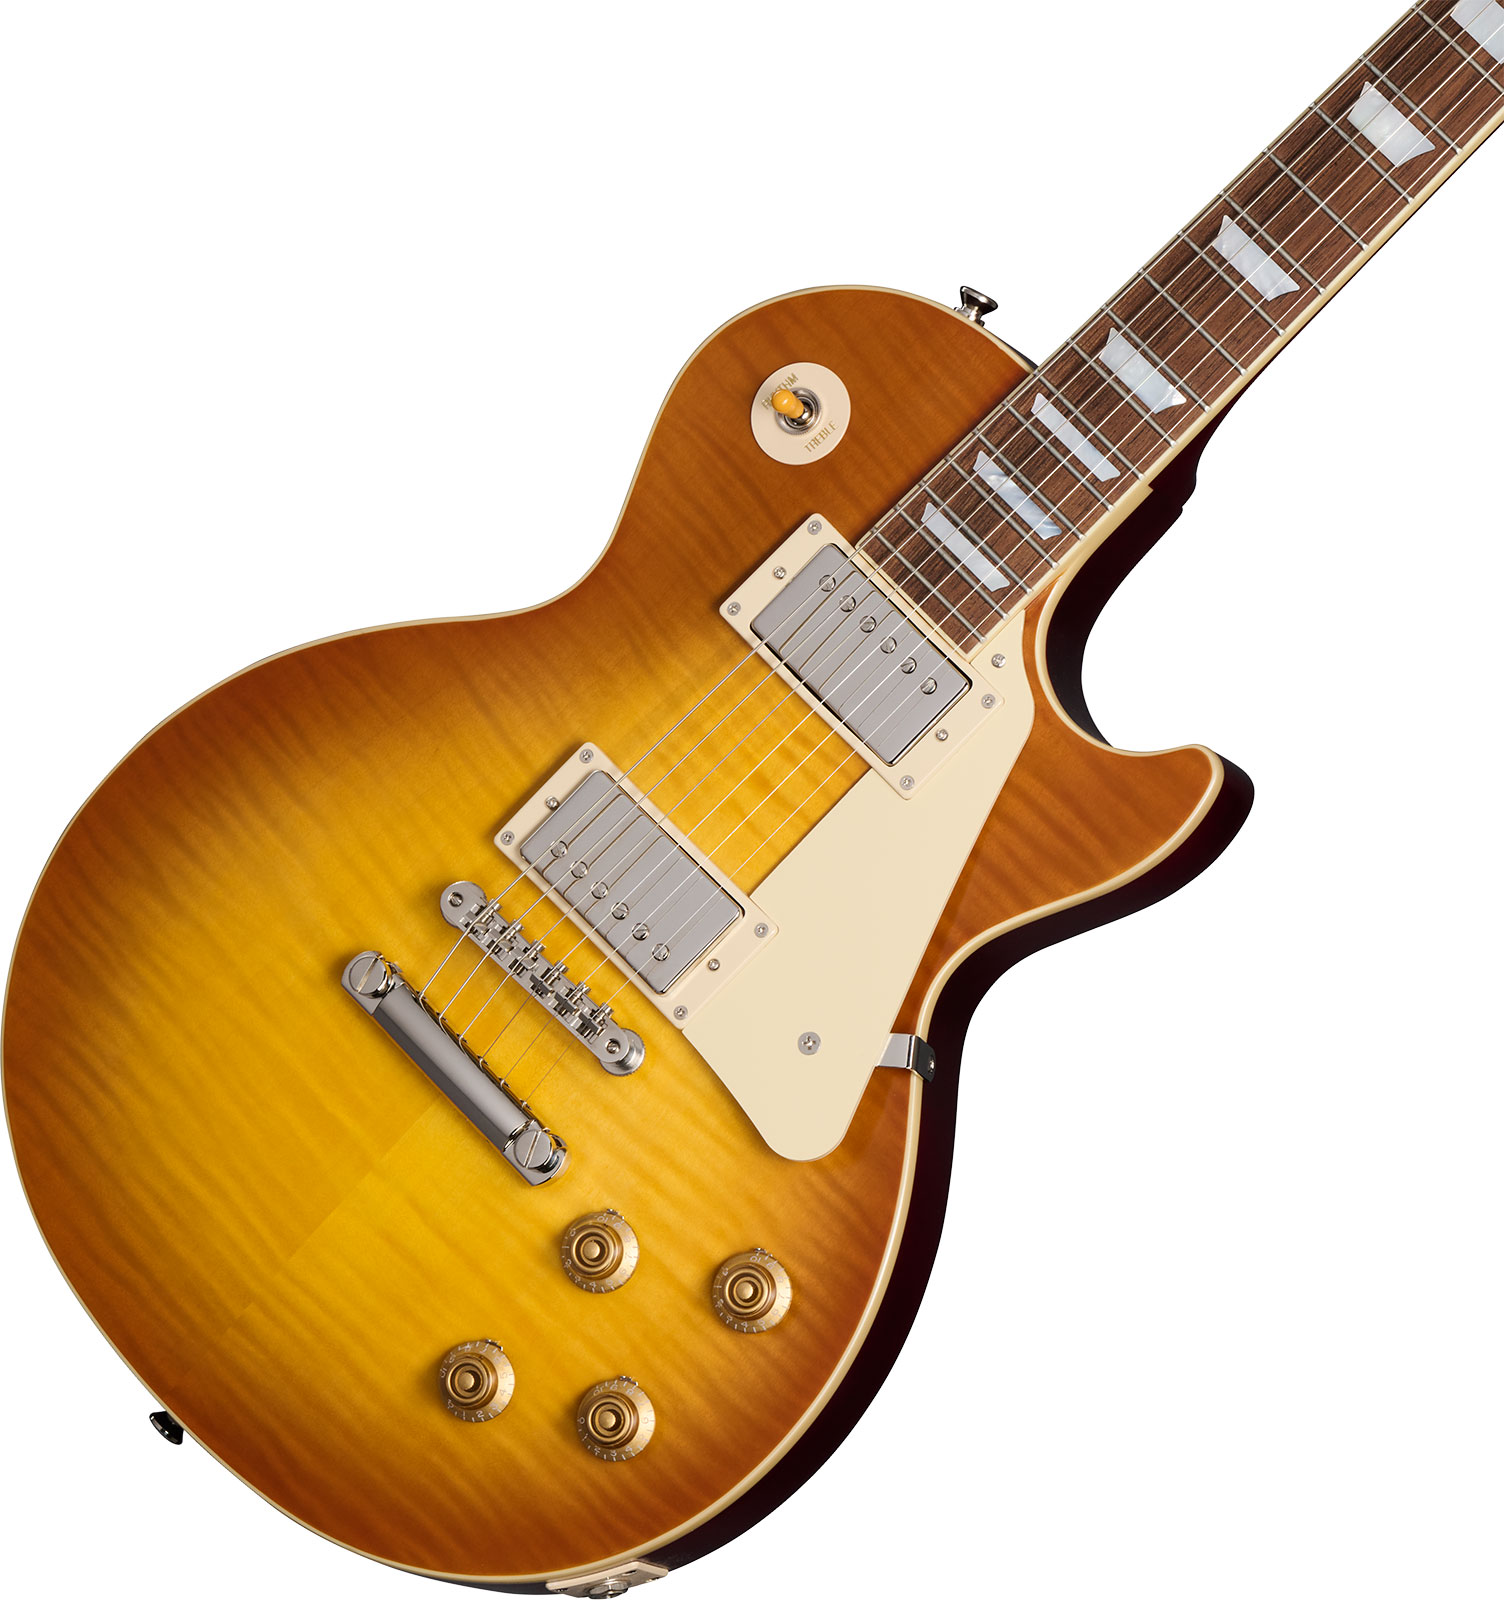 Epiphone 1959 Les Paul Standard Inspired By 2h Gibson Ht Lau - Vos Iced Tea Burst - Single cut electric guitar - Variation 3